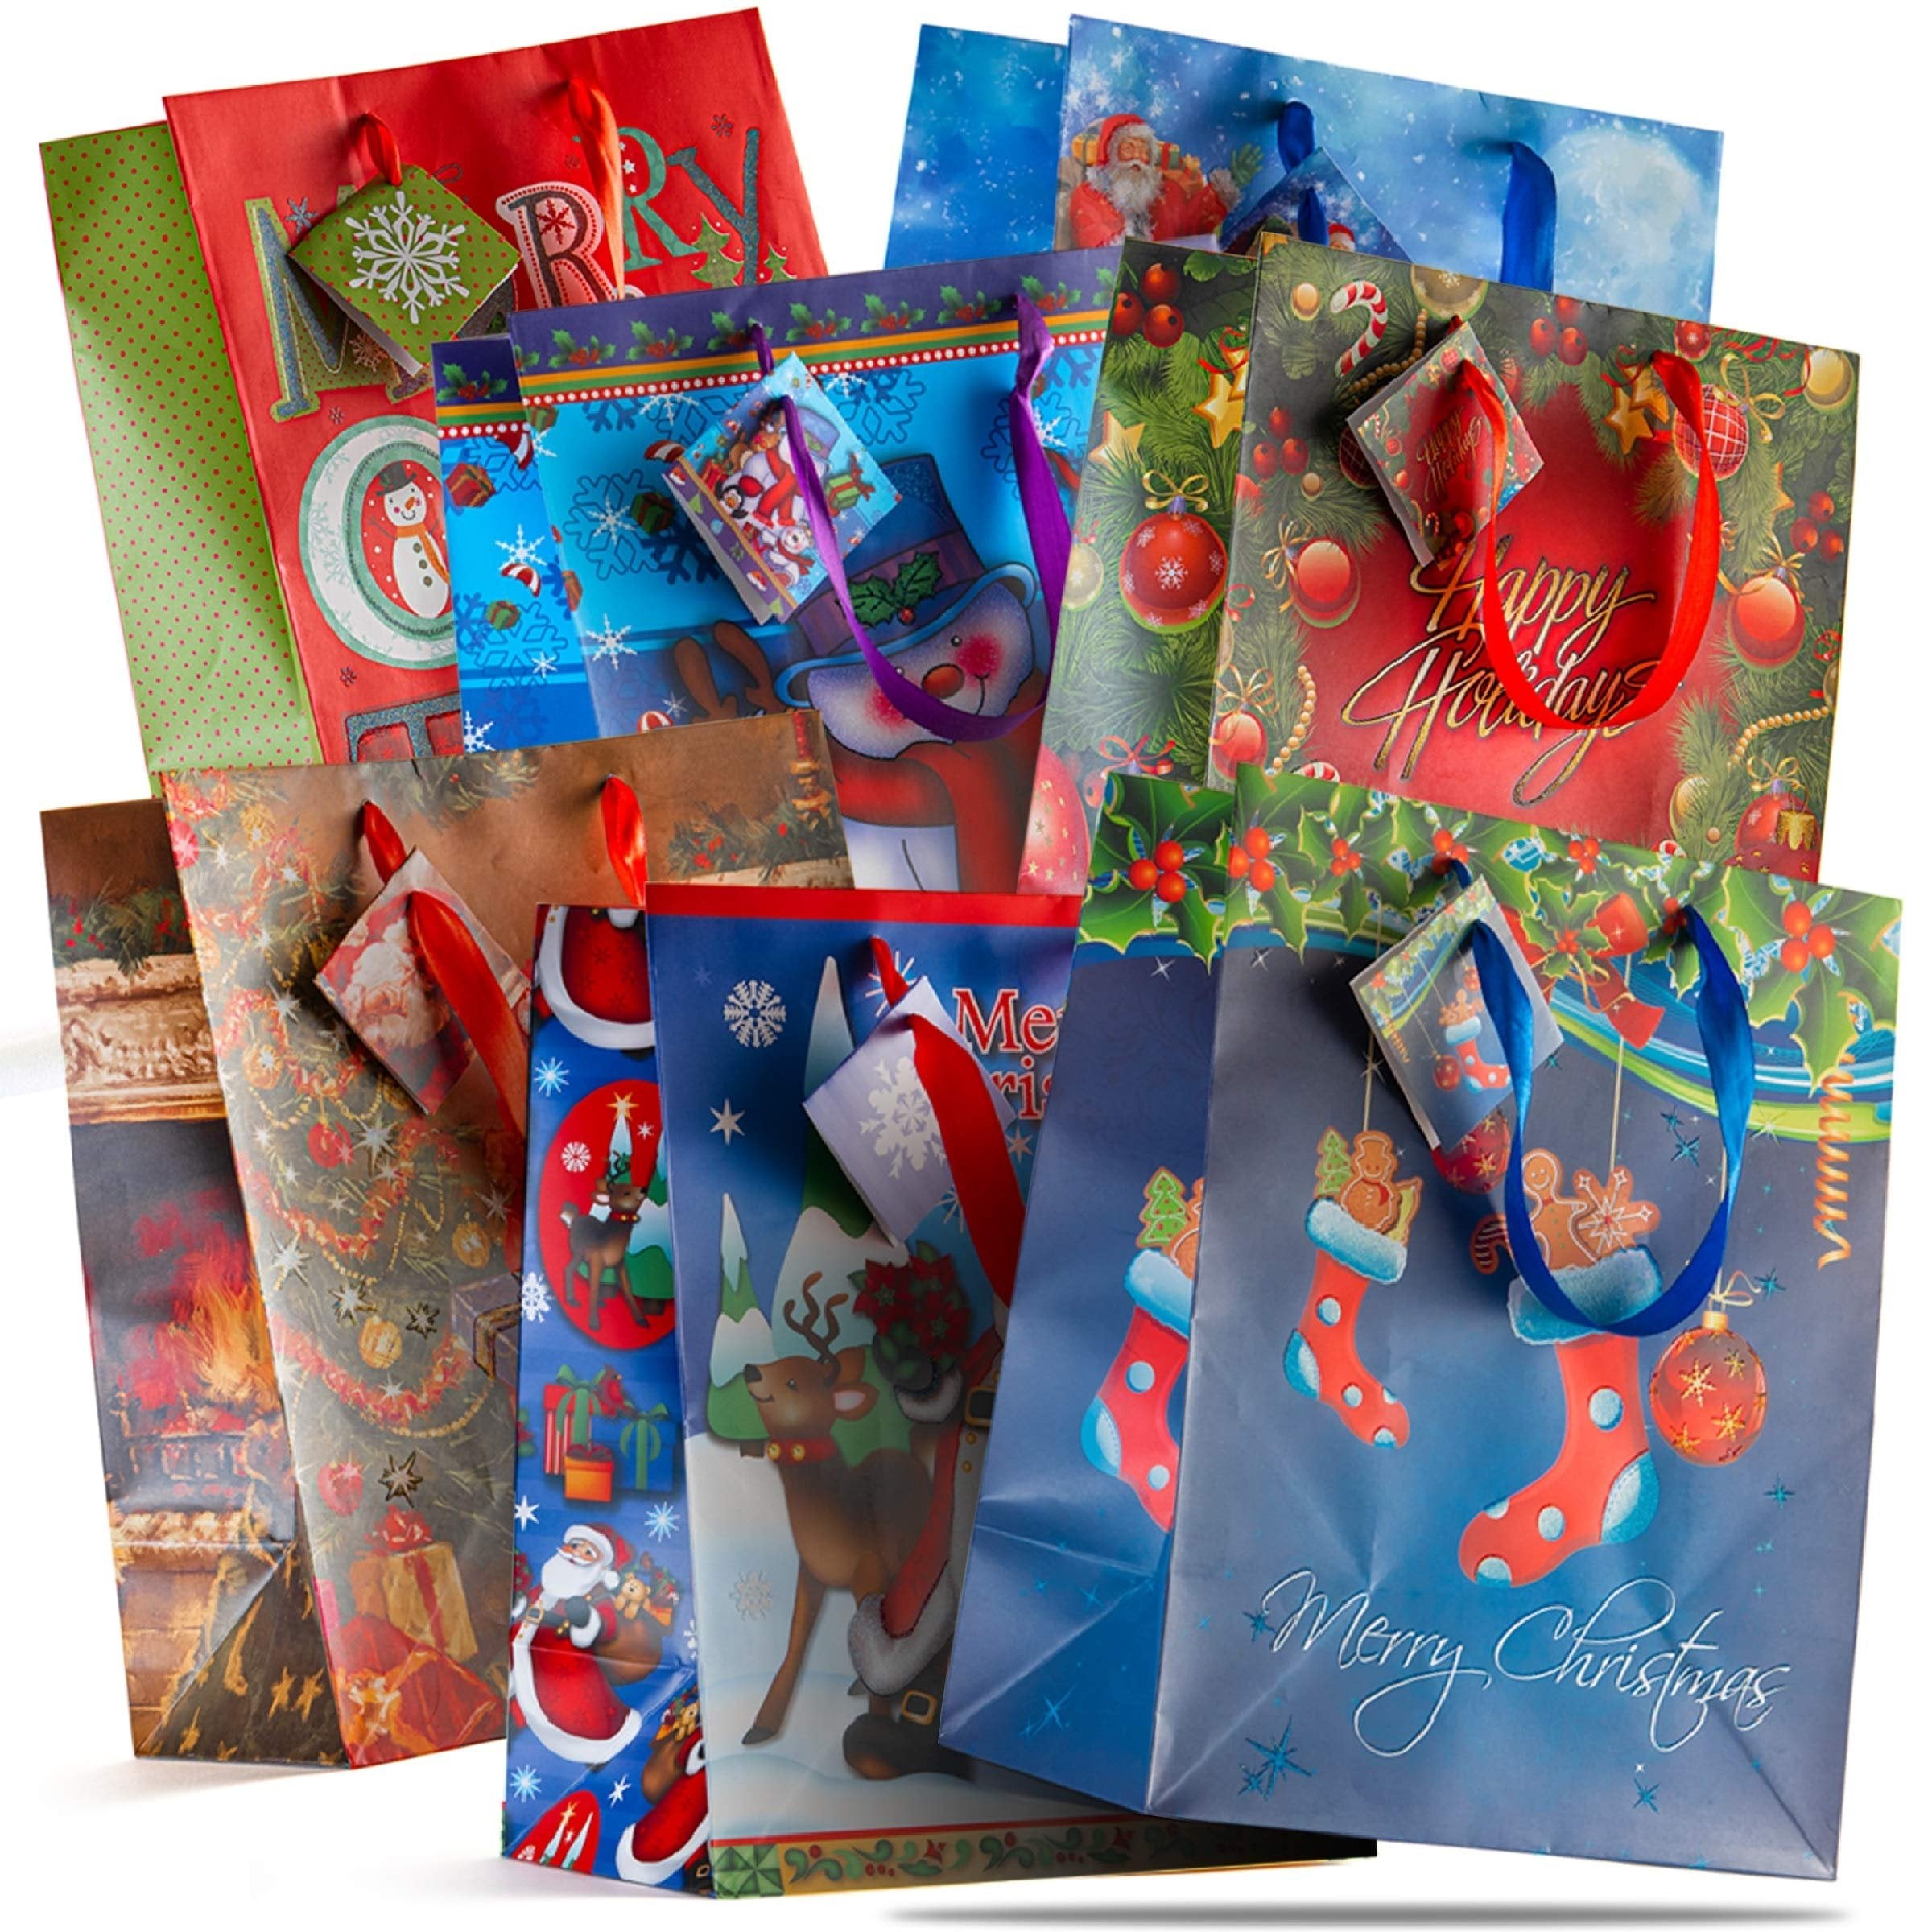 PREXTEX 12 Assorted 13 Inch Christmas Gift Bags: bulk tissue paper bags large size in assorted bright prints christmas bags for gifts party favors